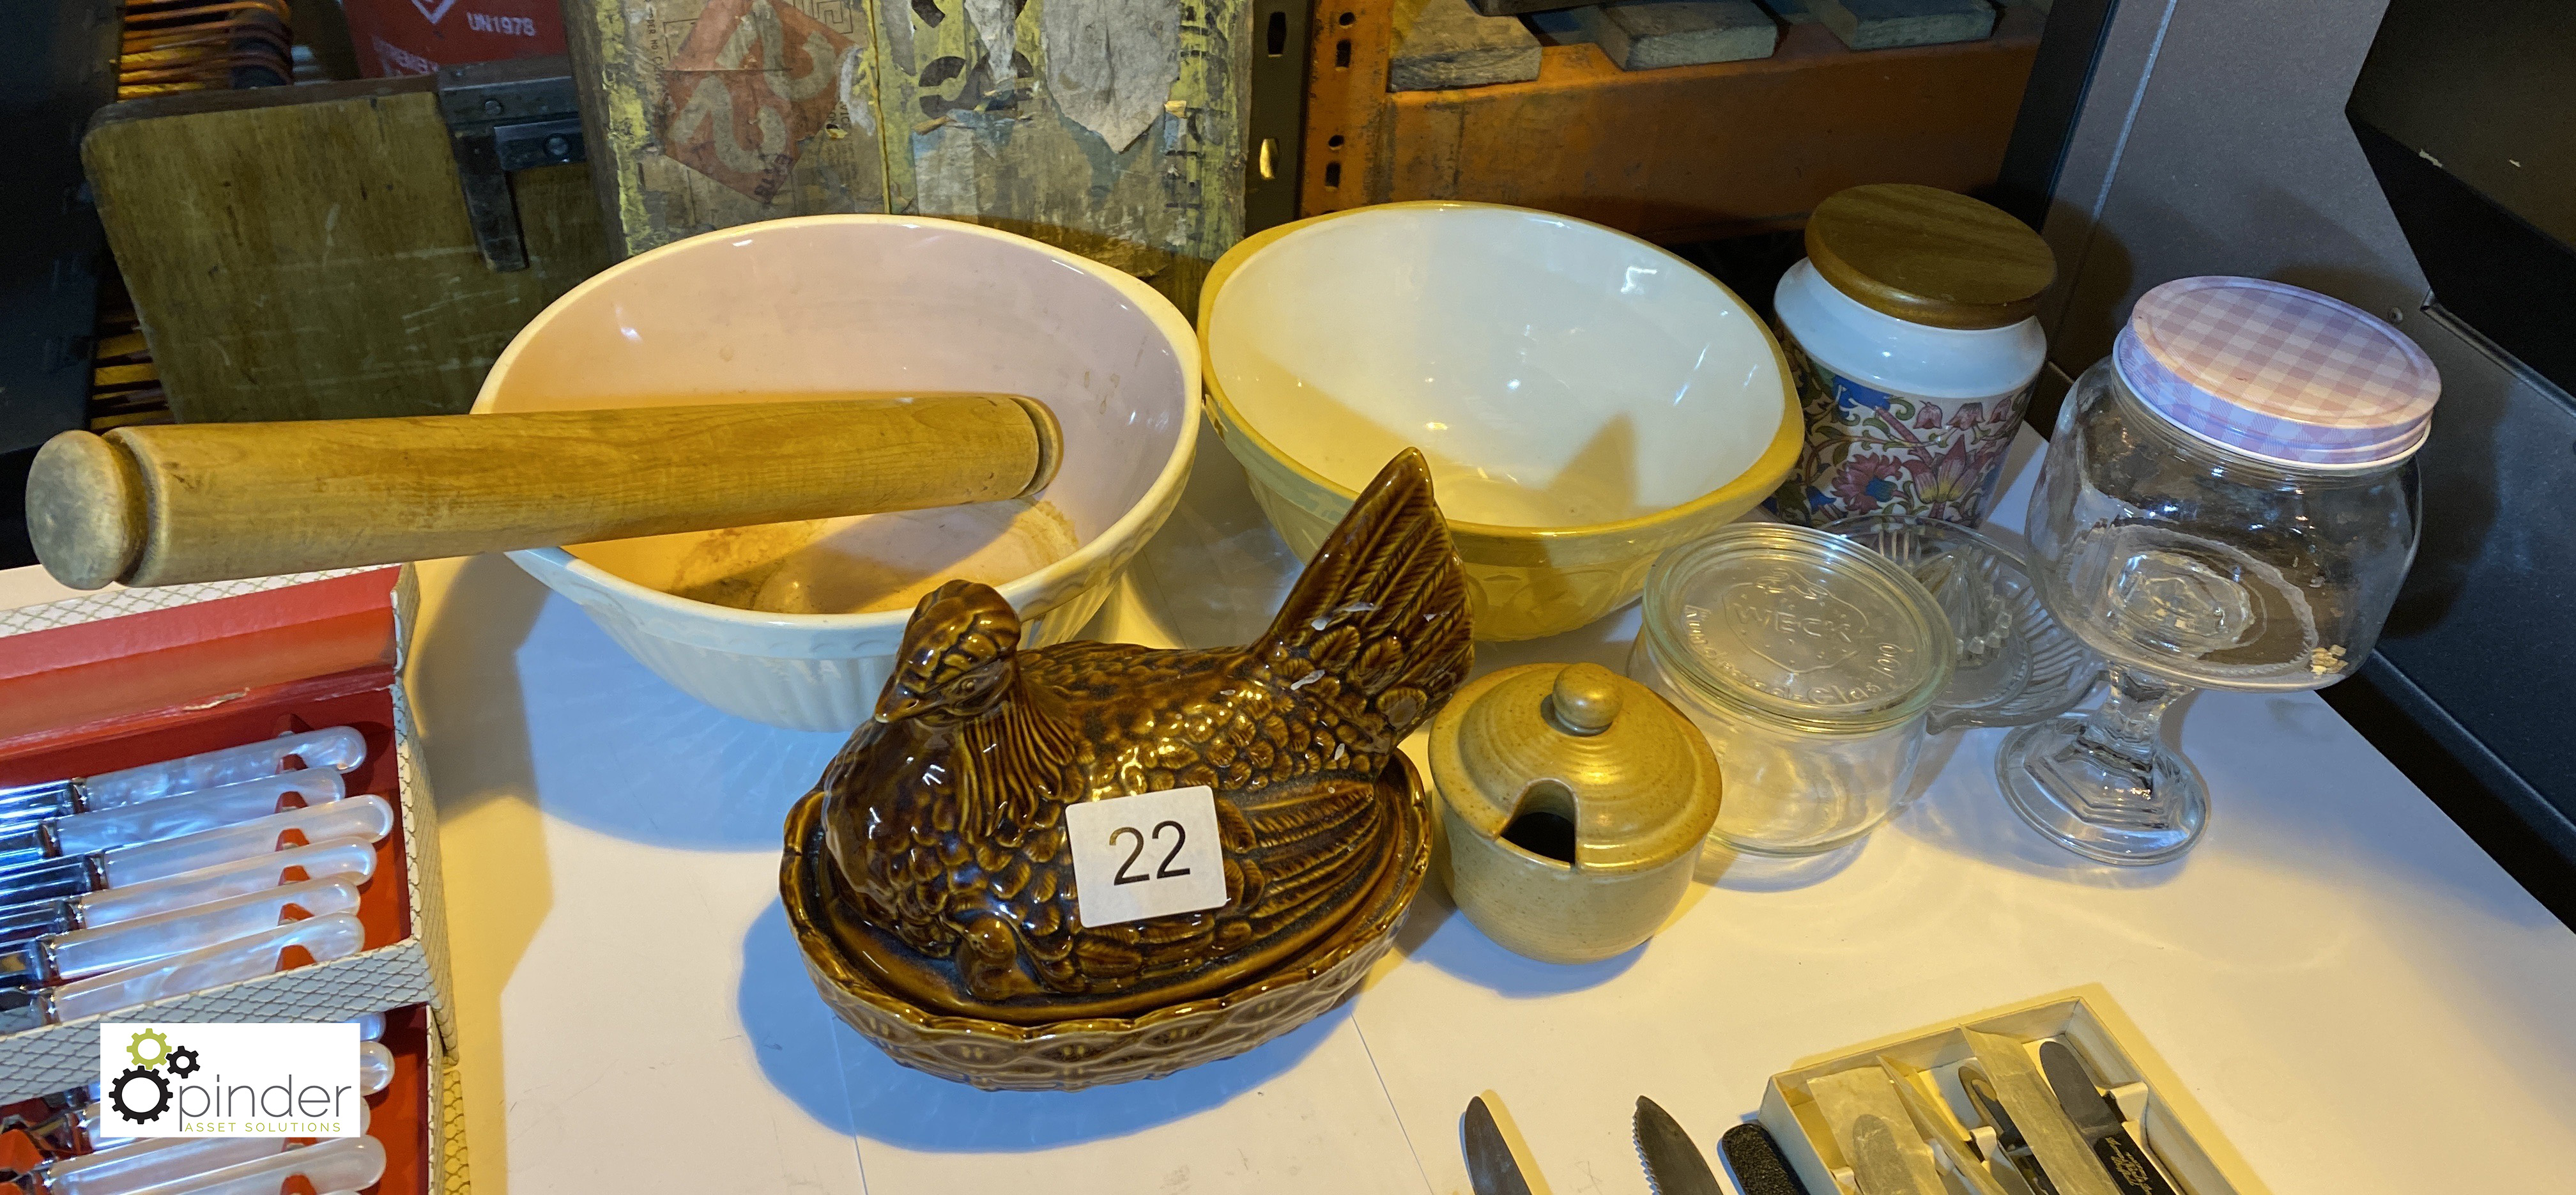 2 Pot Mixing Bowls, wooden Rolling Pin, Egg Holder and various Storage Jars, etc (location: